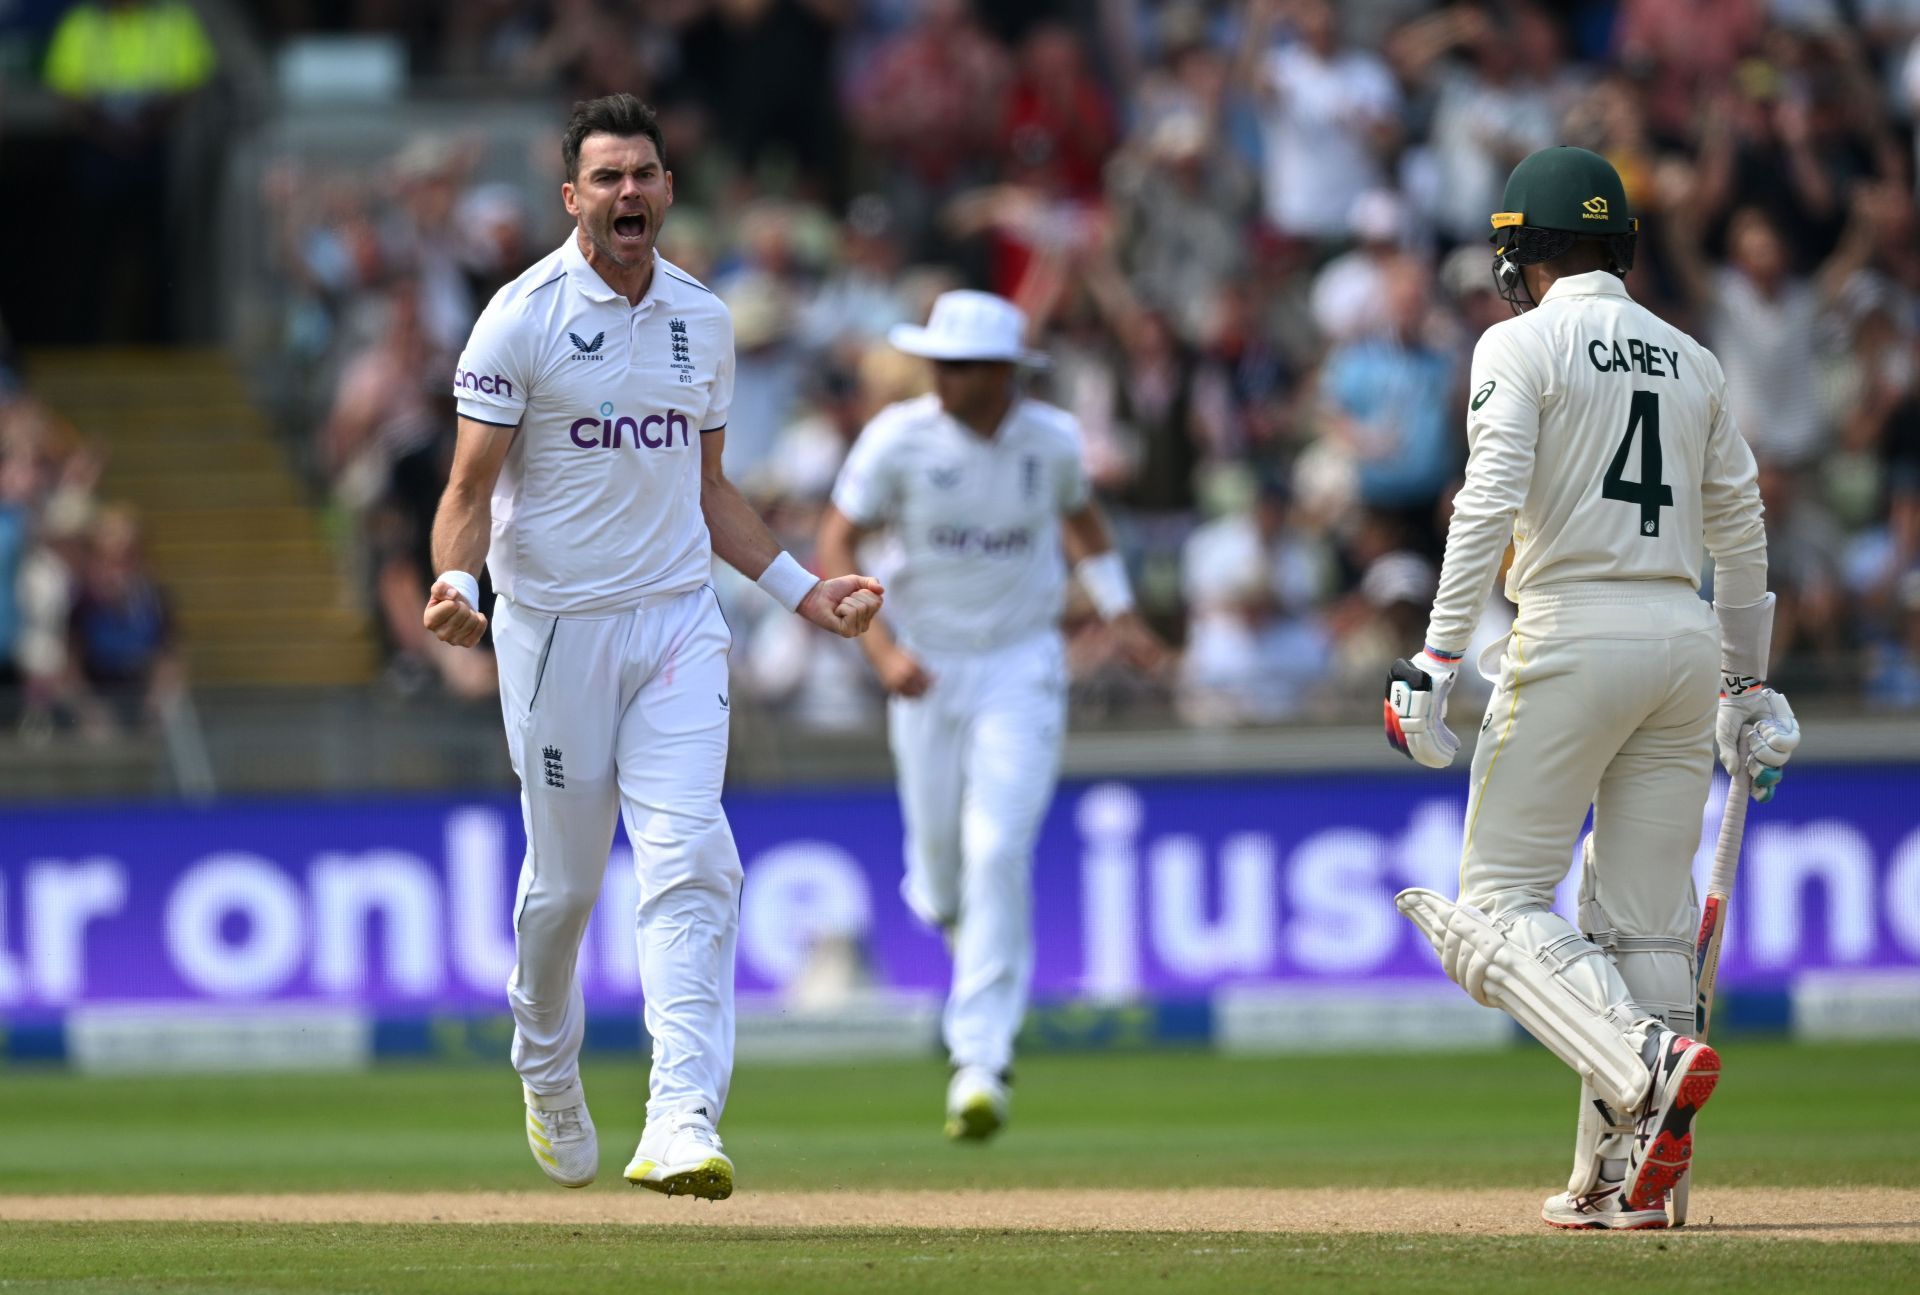 Anderson celebrates the wicket of Alex Carey during the 1st Ashes Test.